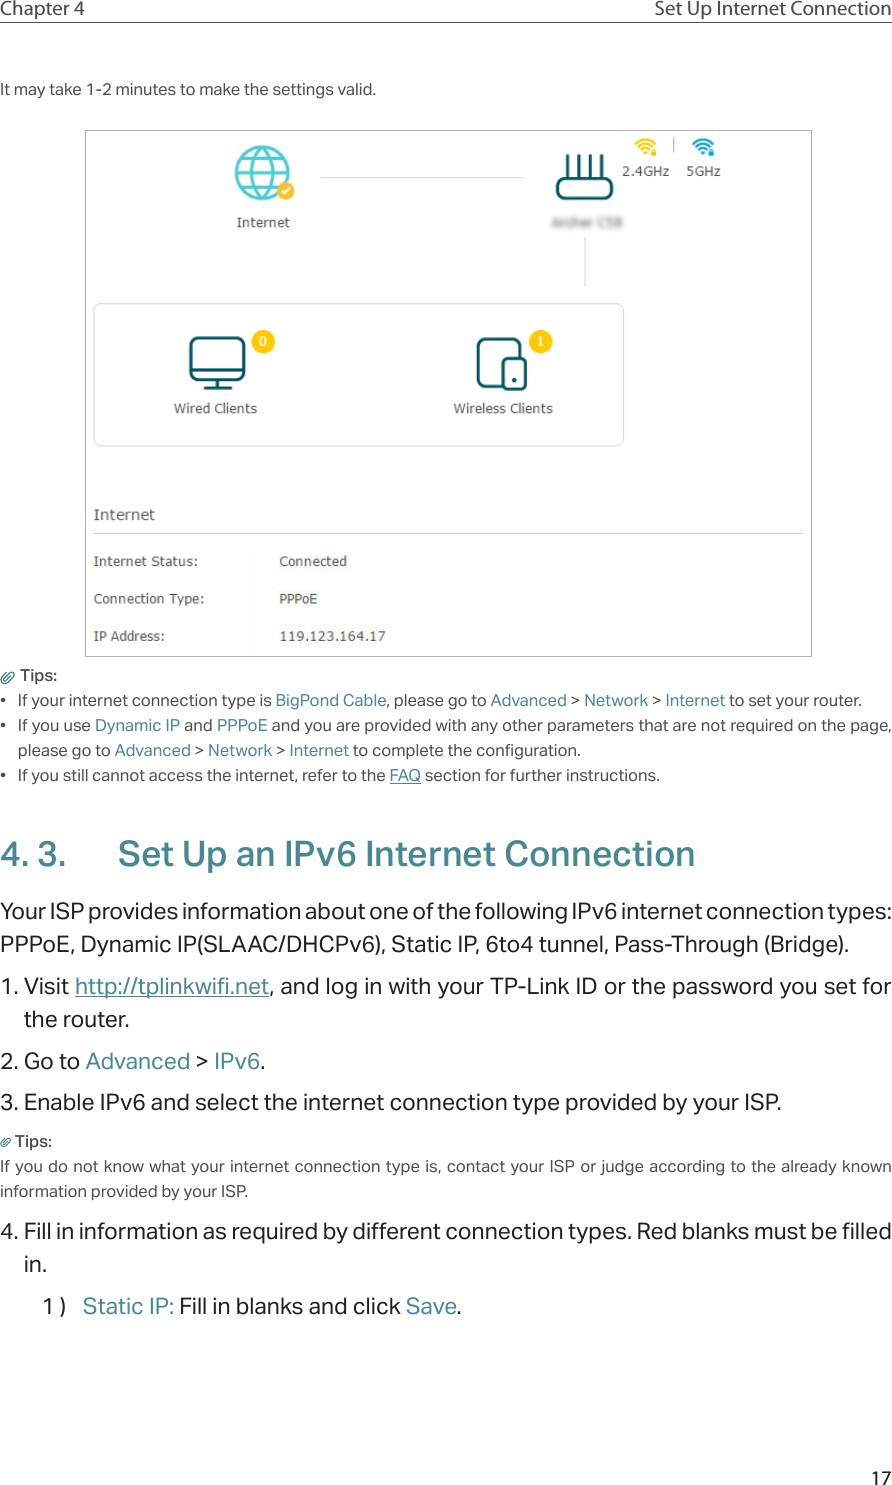 17Chapter 4 Set Up Internet ConnectionIt may take 1-2 minutes to make the settings valid. Tips: •  If your internet connection type is BigPond Cable, please go to Advanced &gt; Network &gt; Internet to set your router.•  If you use Dynamic IP and PPPoE and you are provided with any other parameters that are not required on the page, please go to Advanced &gt; Network &gt; Internet to complete the configuration.•  If you still cannot access the internet, refer to the FAQ section for further instructions.4. 3.  Set Up an IPv6 Internet ConnectionYour ISP provides information about one of the following IPv6 internet connection types: PPPoE, Dynamic IP(SLAAC/DHCPv6), Static IP, 6to4 tunnel, Pass-Through (Bridge).1. Visit http://tplinkwifi.net, and log in with your TP-Link ID or the password you set for the router.2. Go to Advanced &gt; IPv6. 3. Enable IPv6 and select the internet connection type provided by your ISP.Tips:If you do not know what your internet connection type is, contact your ISP or judge according to the already known information provided by your ISP.4. Fill in information as required by different connection types. Red blanks must be filled in.1 )  Static IP: Fill in blanks and click Save.